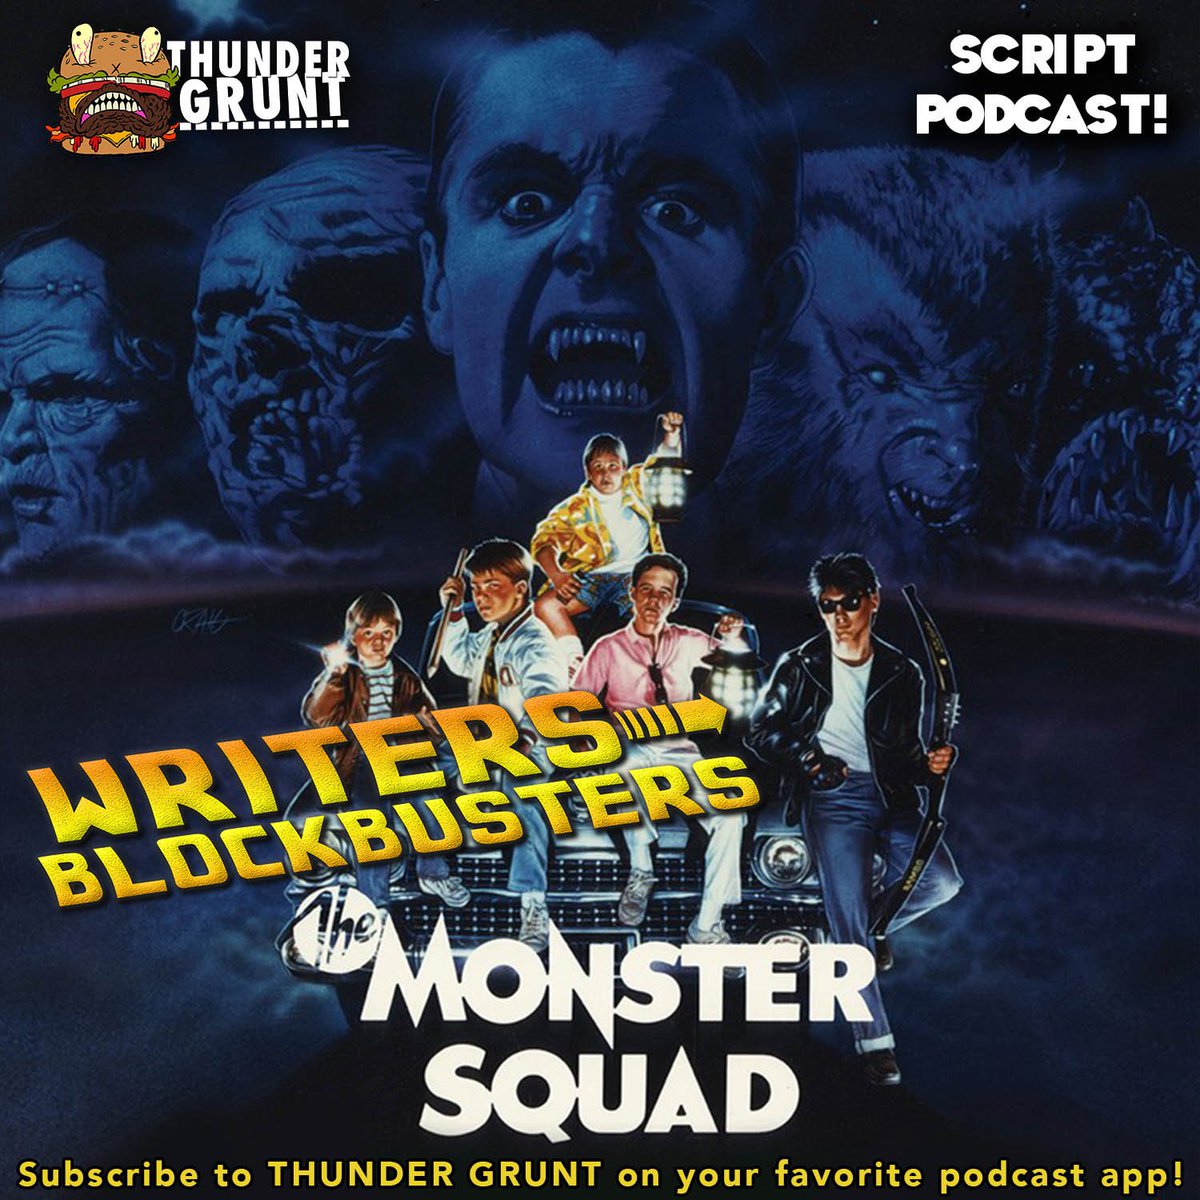 Our #podcast talks Hollywood movies from a #script perspective. For #halloween2019 we chose to discuss the beloved classic #TheMonsterSquad, written by legends Shane Black and Fred Dekker! Love this movie dearly, hope we did it justice!

thundergrunt.com/e/writersblock…